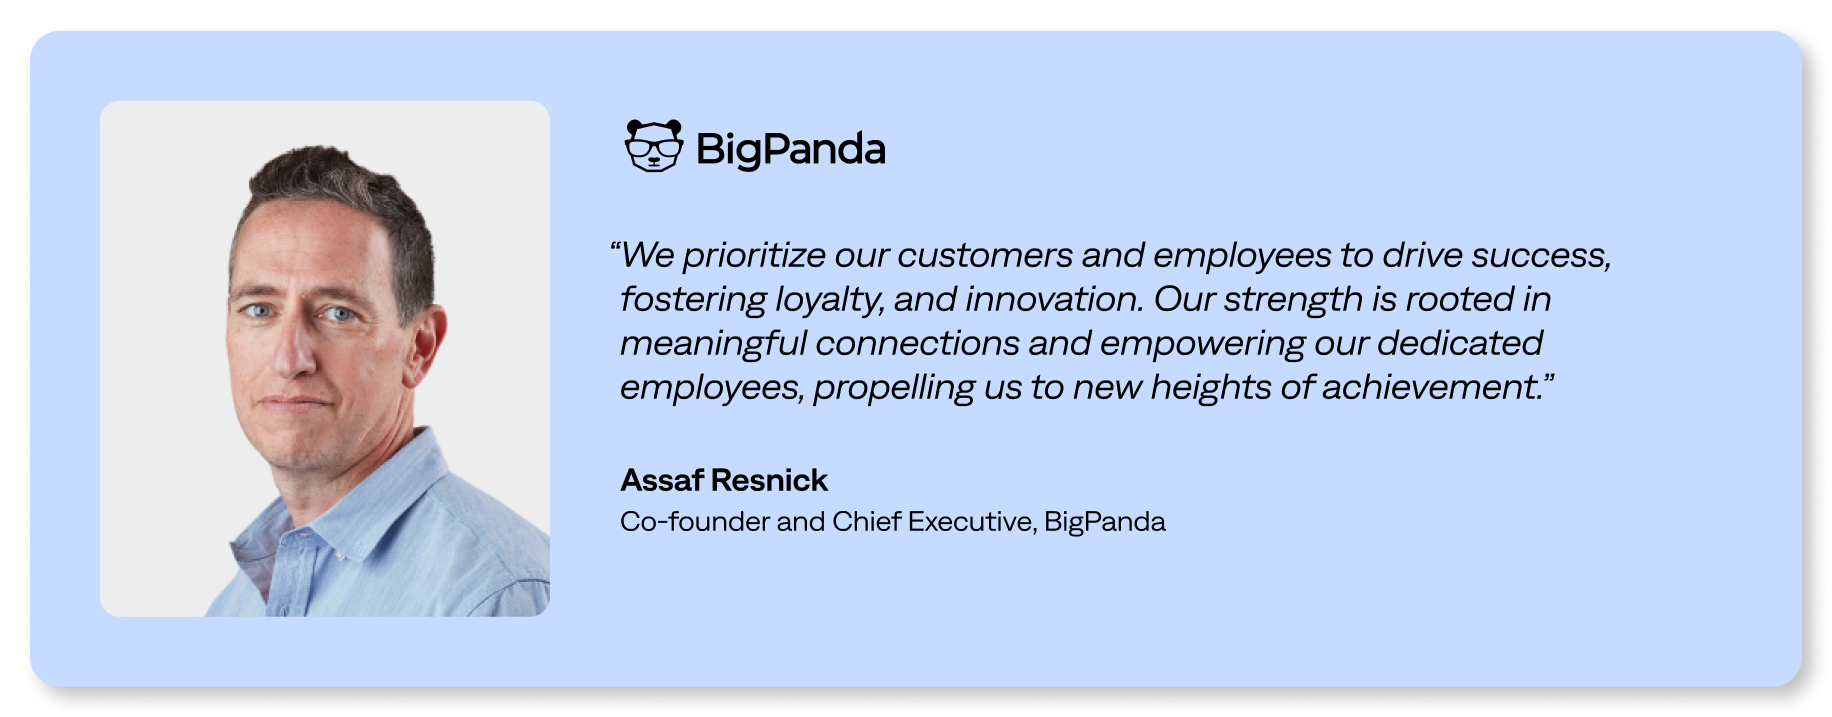 We prioritize our customers and employees to drive success, fostering loyalty and innovation. Our strength is rooted in meaningful connections and empowering our dedicated employees, propelling us to new heights of achievement.”</p>
<p>Assaf Resnick<br />
Co-founder and Chief Executive, BigPanda